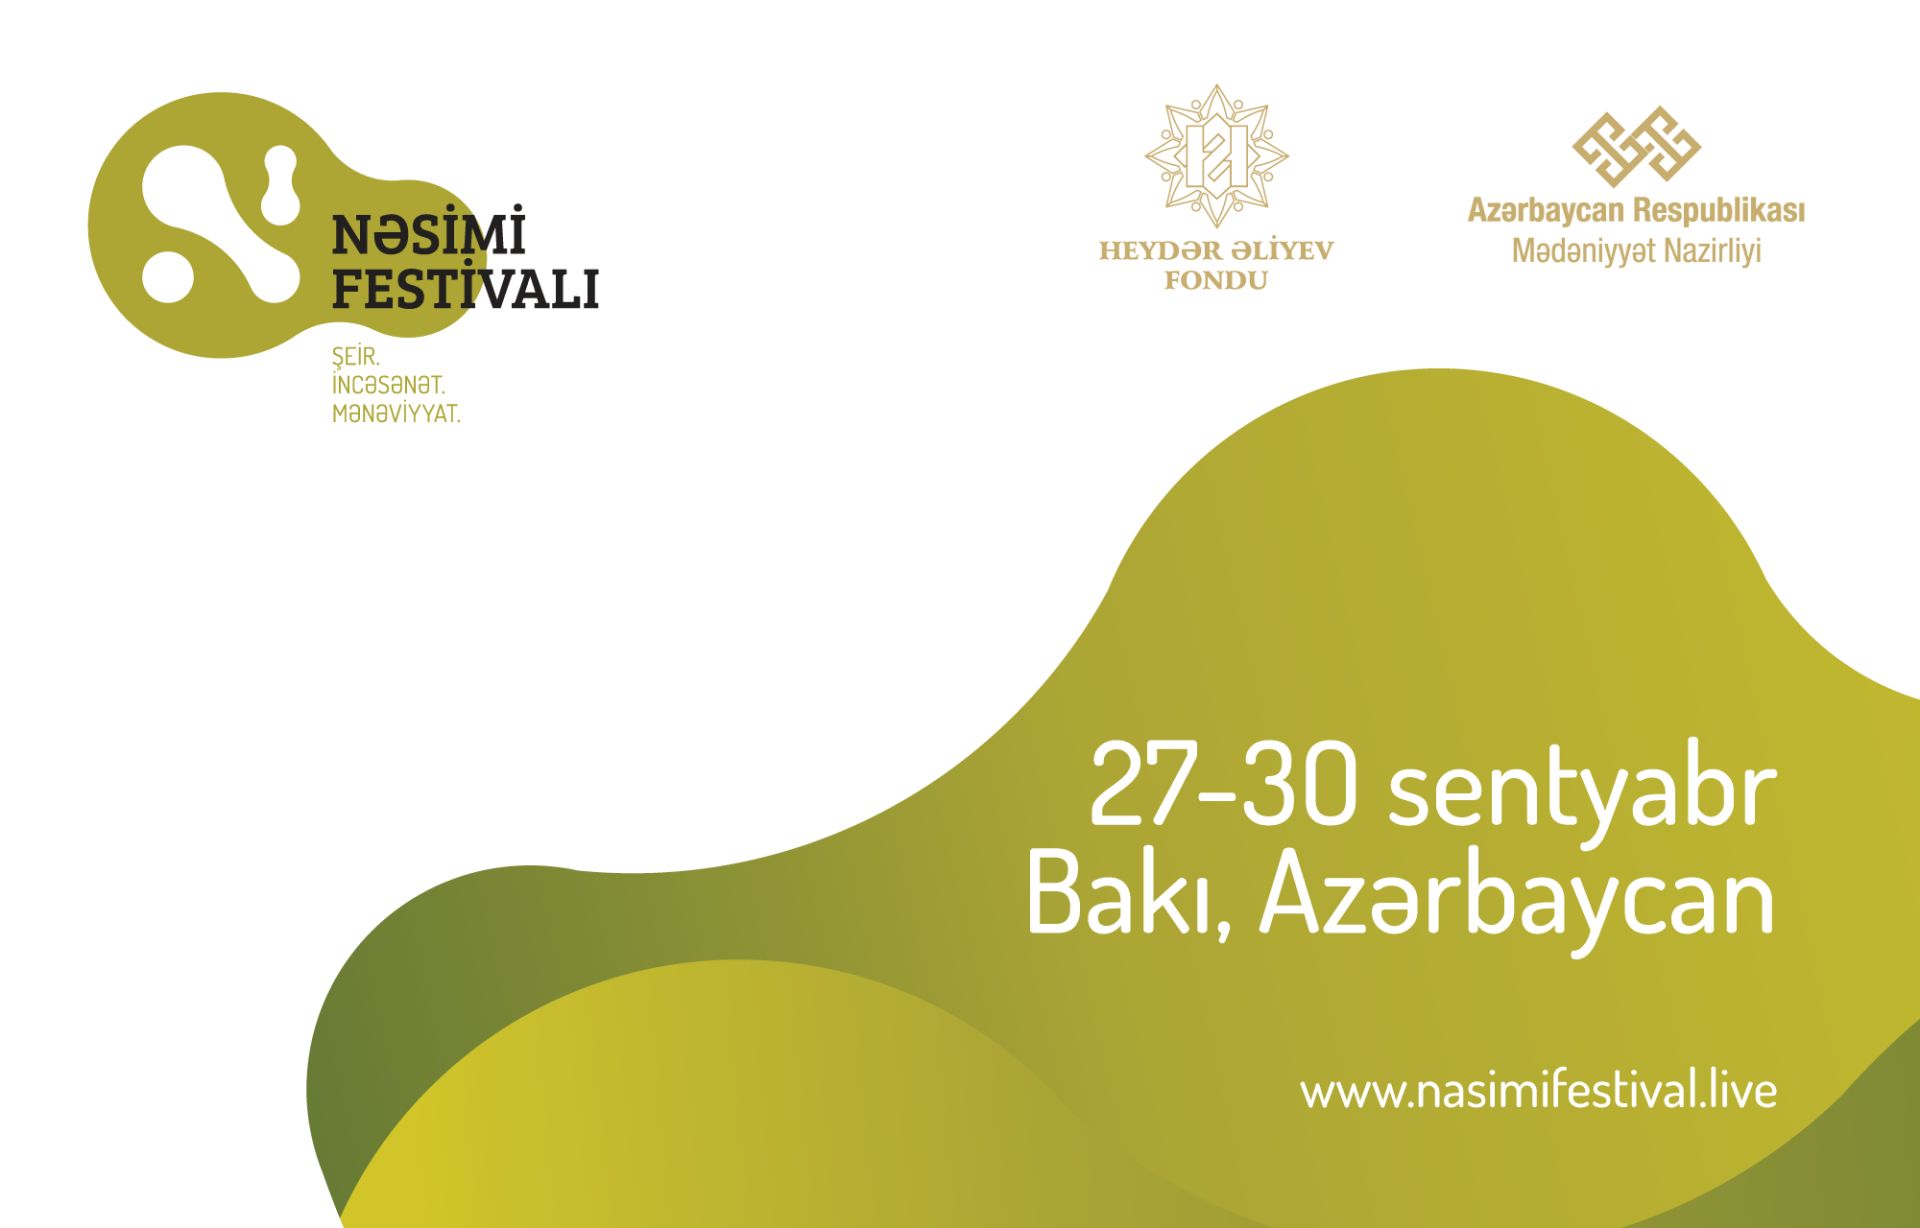 Information on events at Nasimi Festival in Azerbaijan available via mobile application